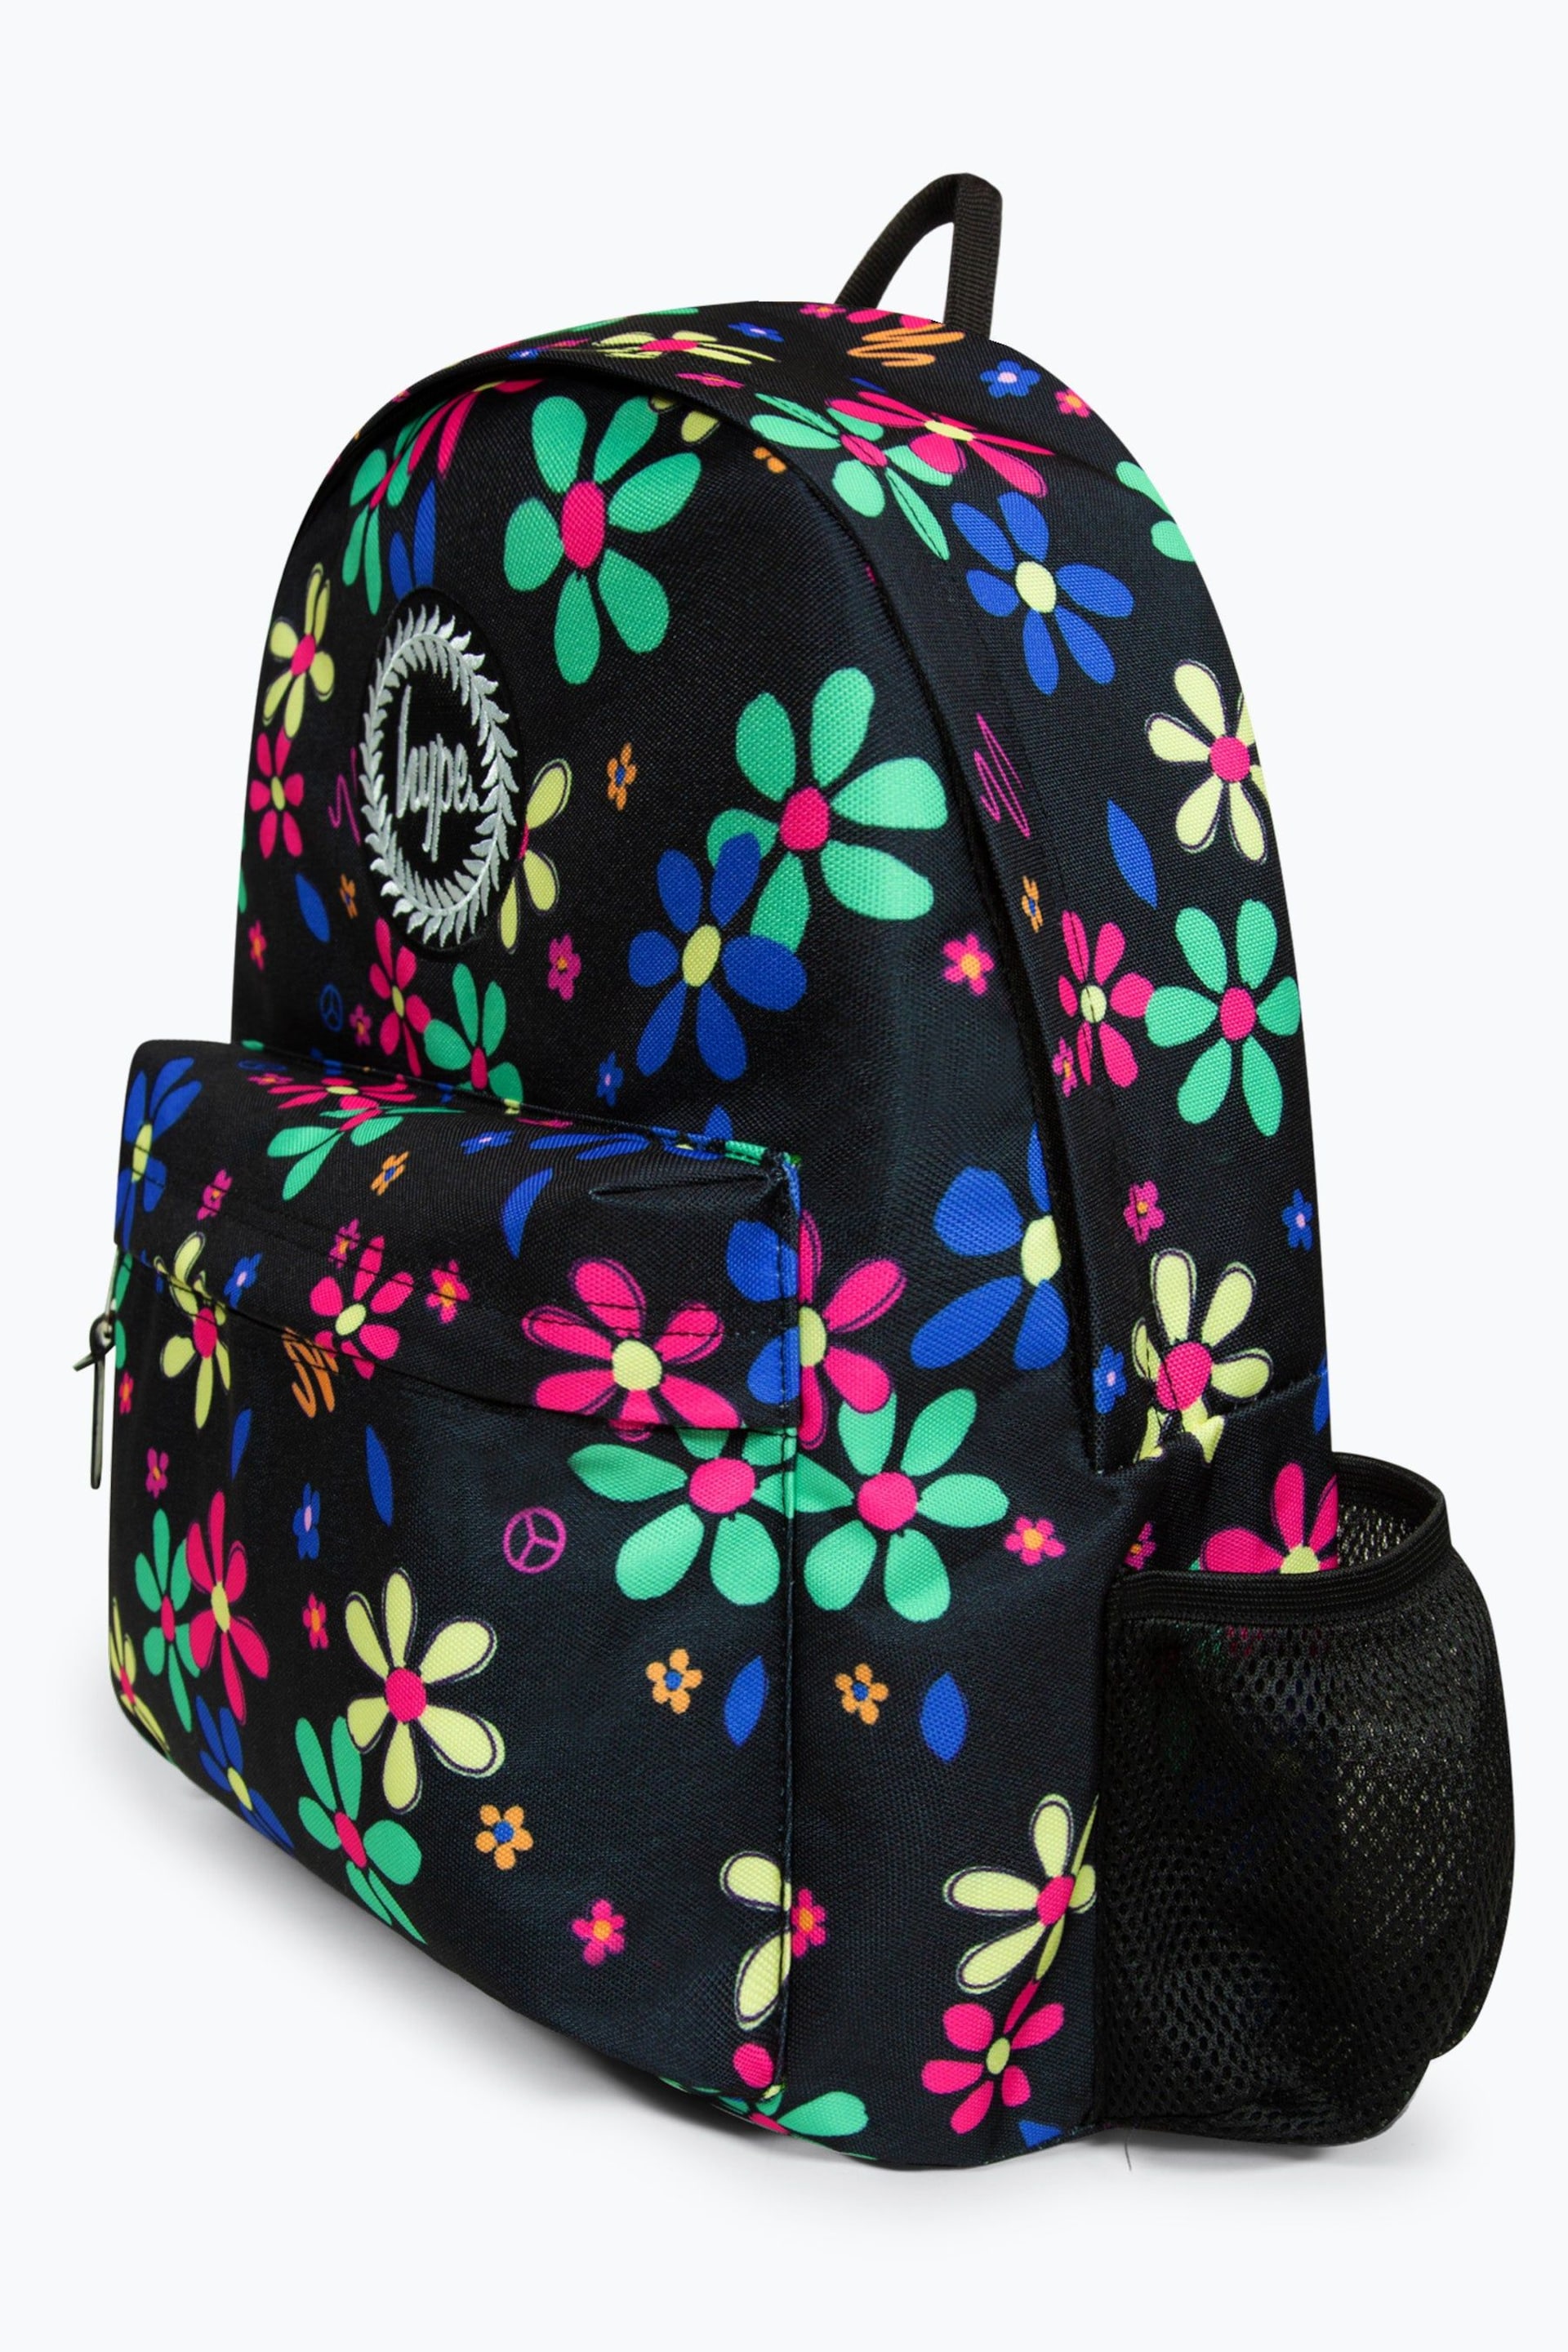 Hype. Hand Drawn Floral Backpack - Image 3 of 11